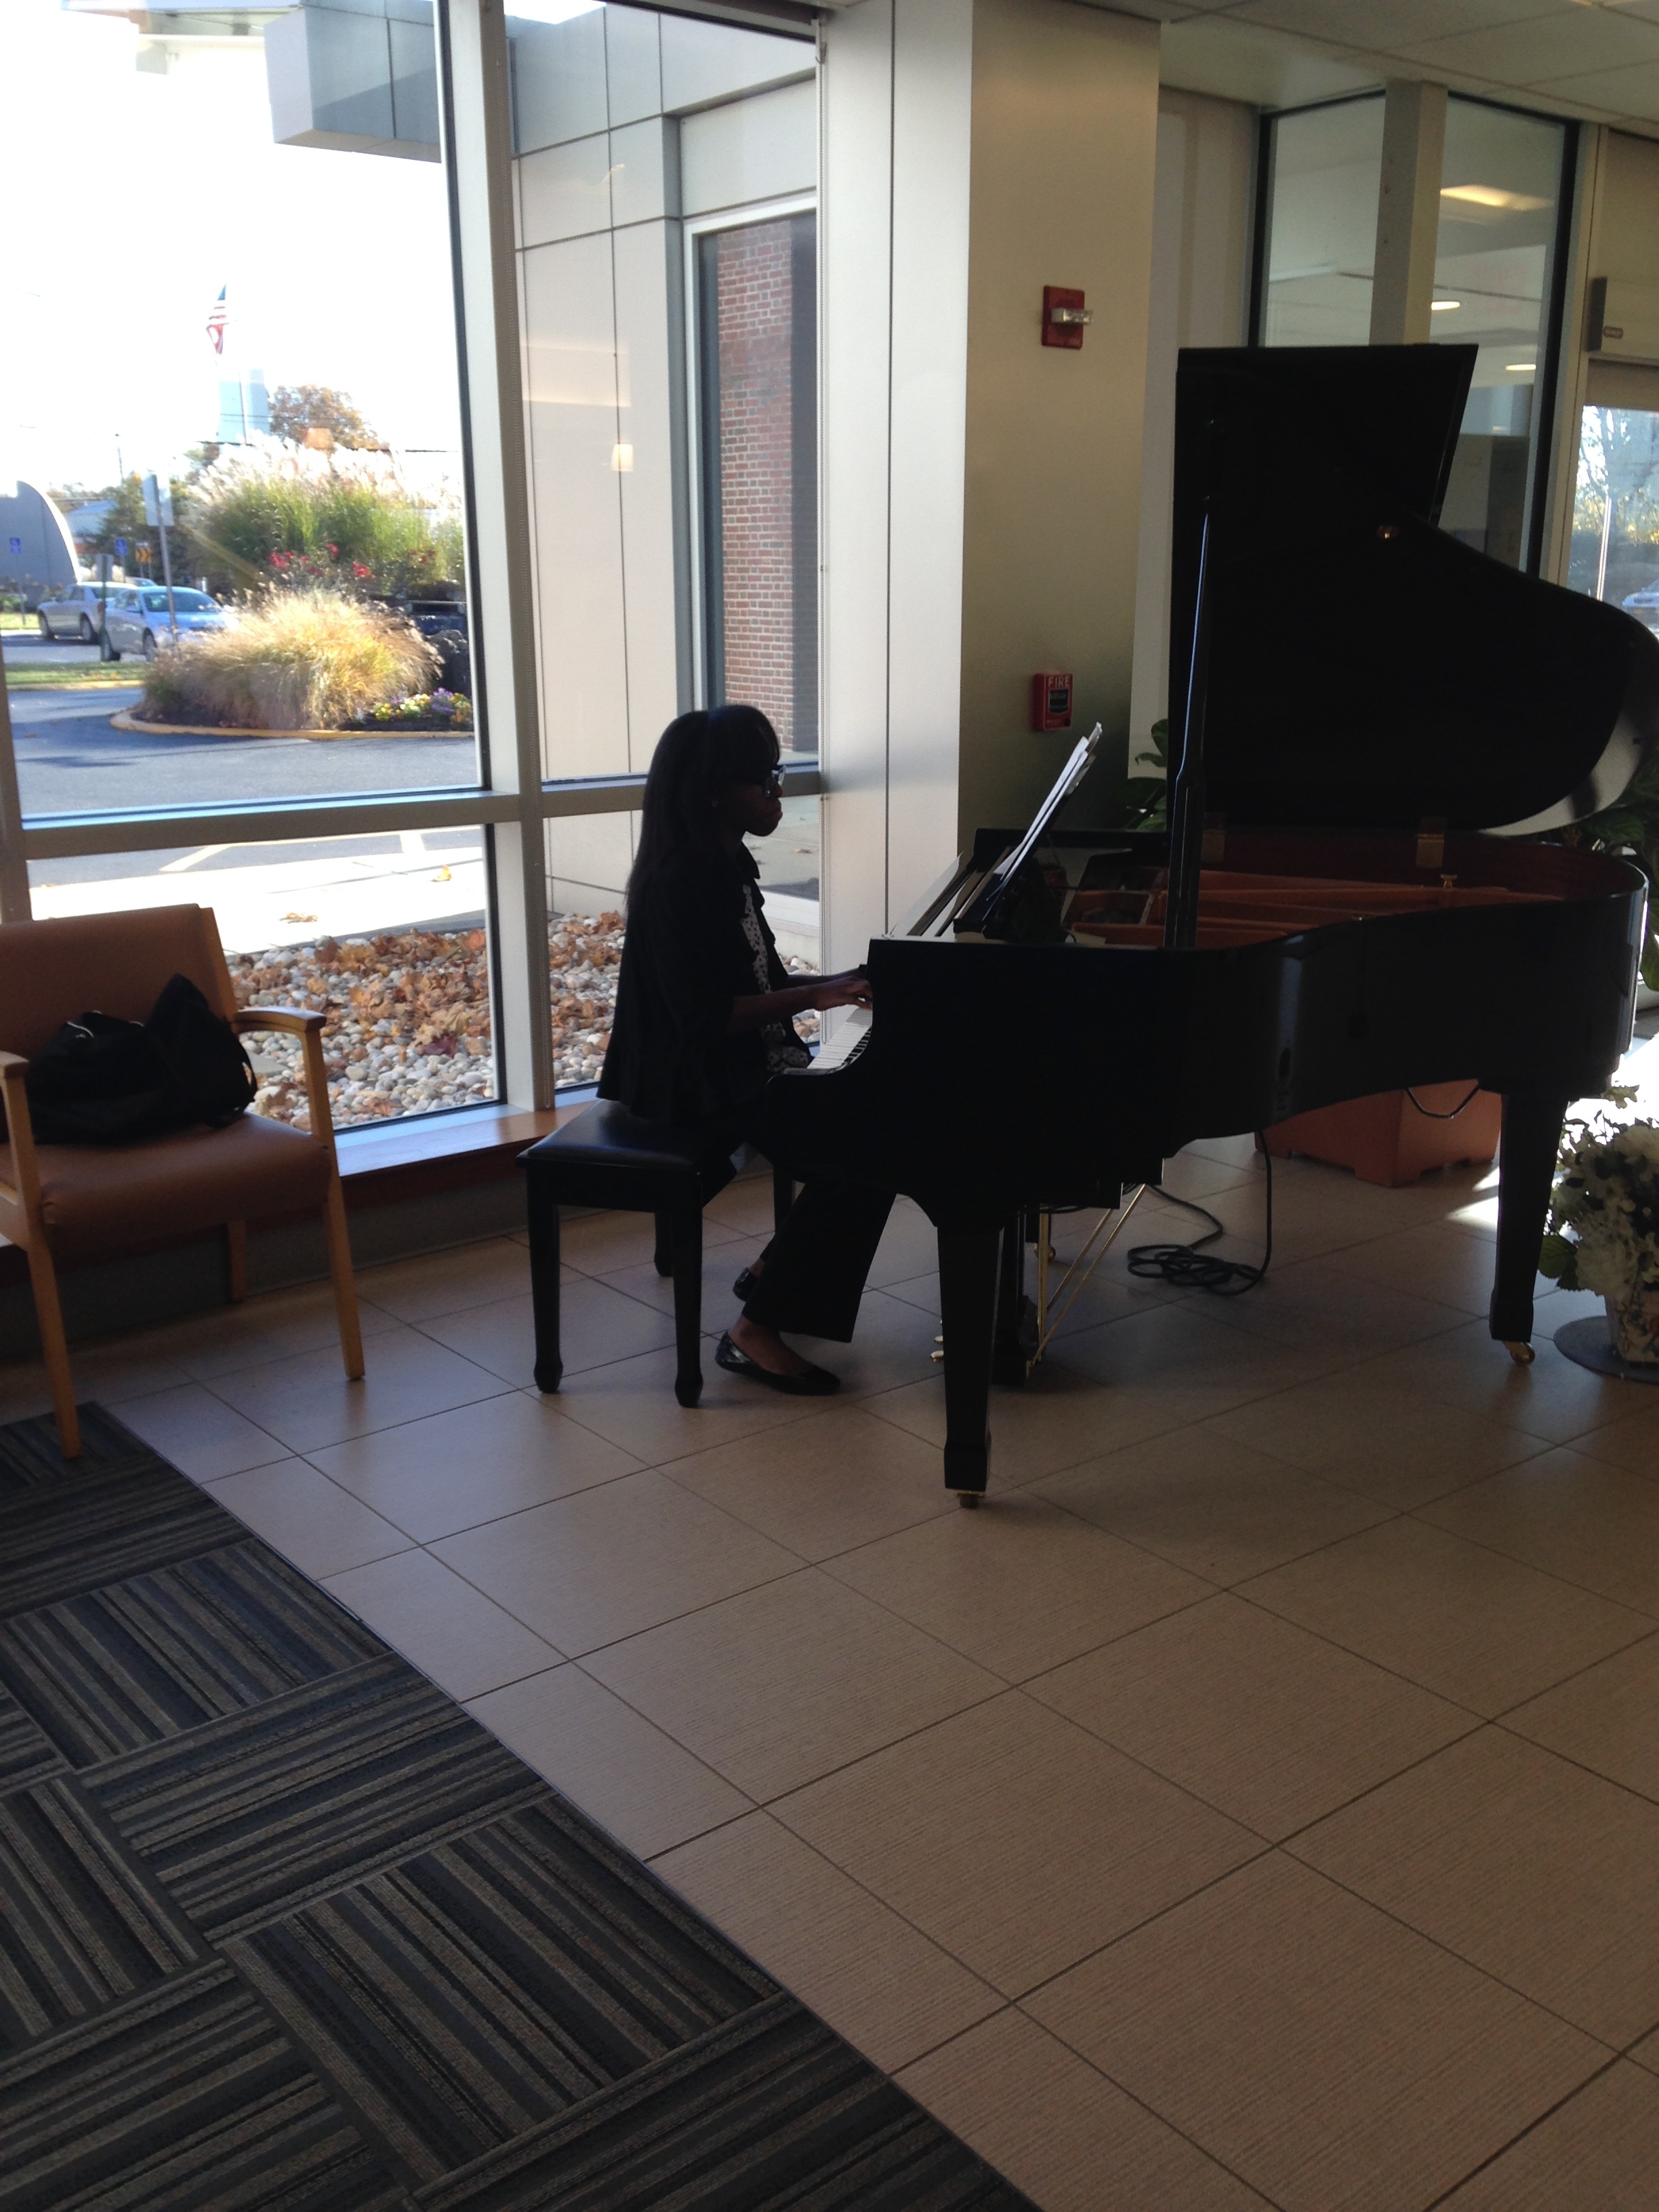 A Performance at Peconic Hospital